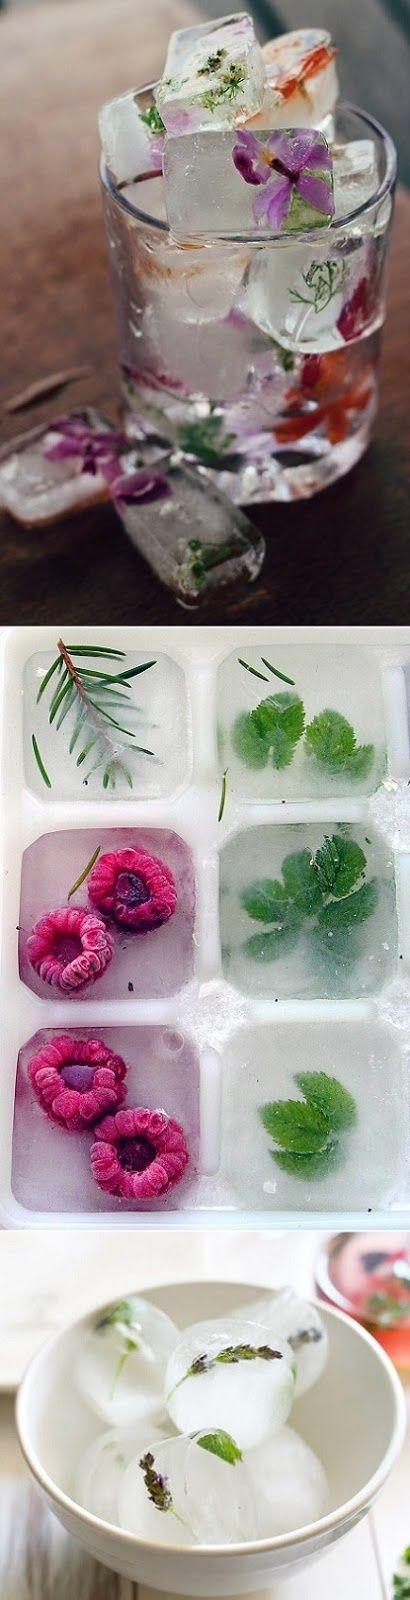 Mariage - How To Make Floral, Fruit, And Herb Ice Cubes